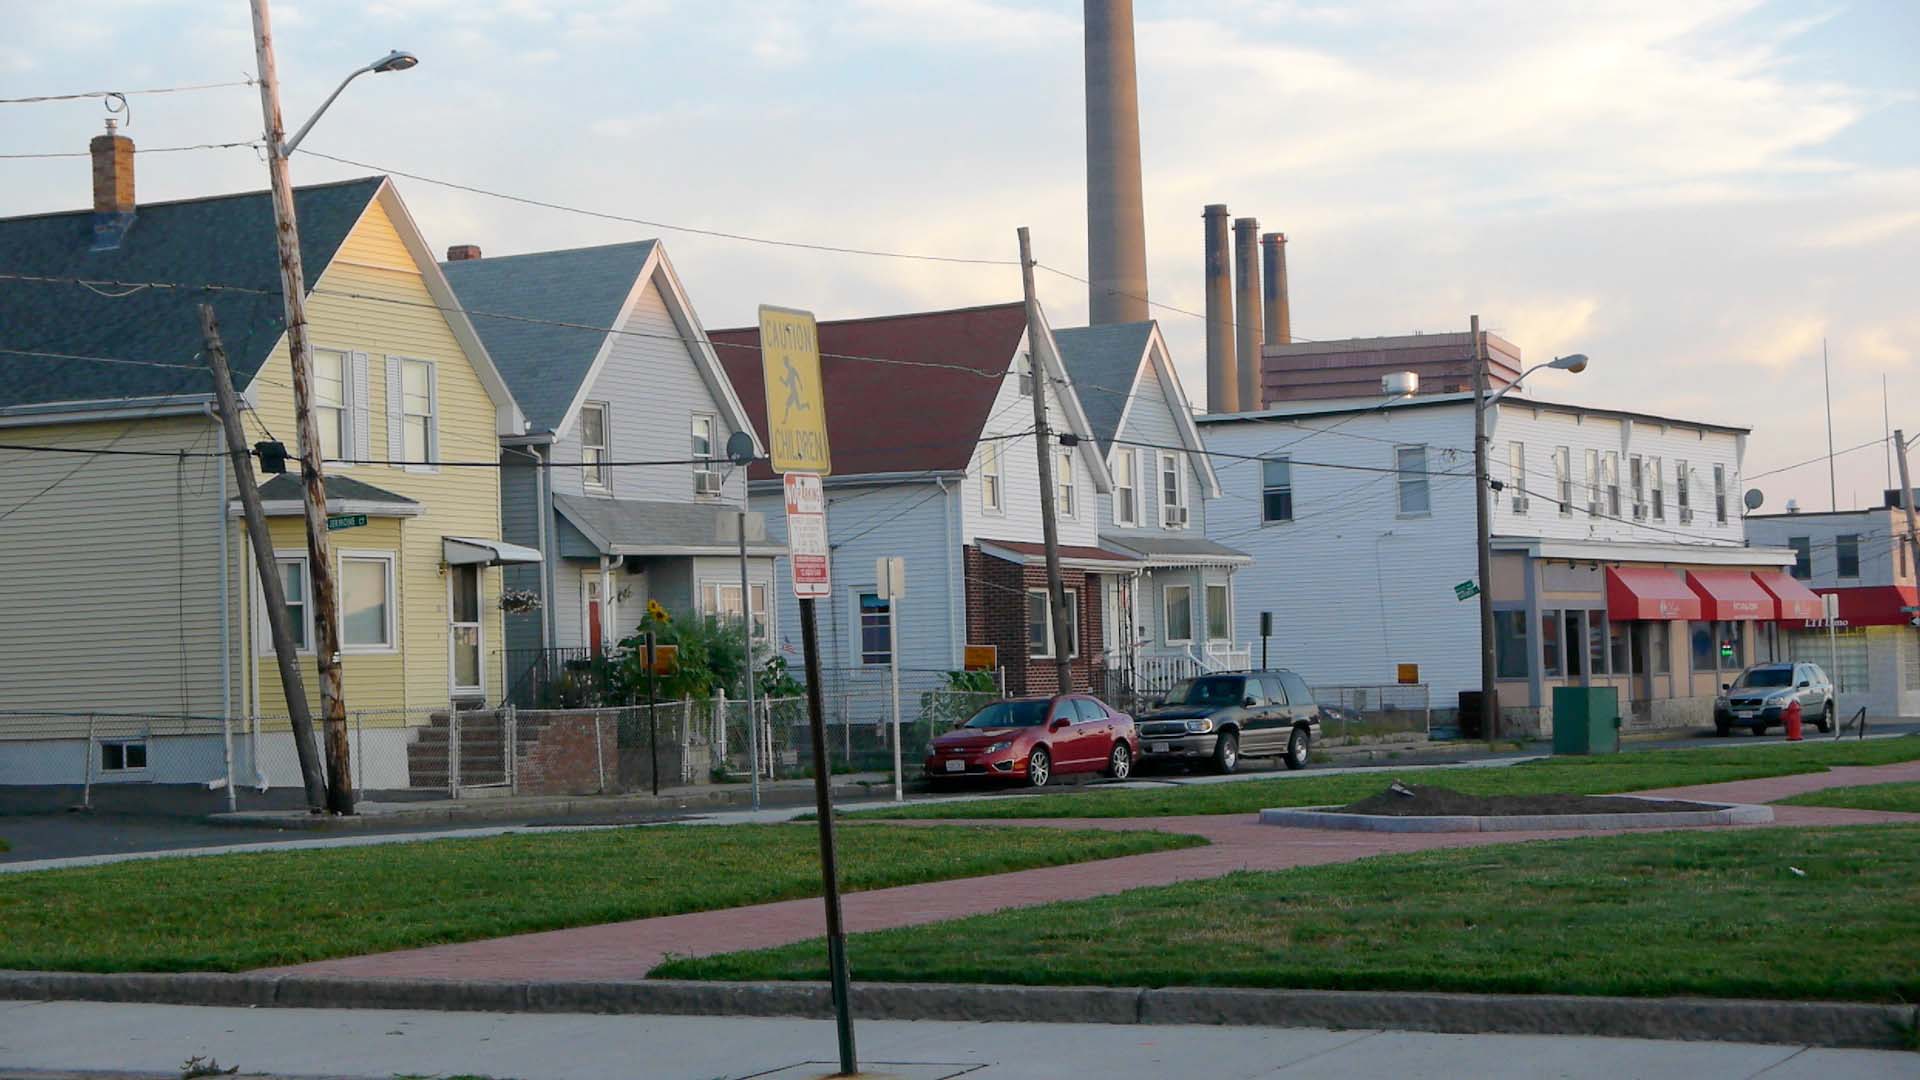 A row of houses with smokestacks towering over them.